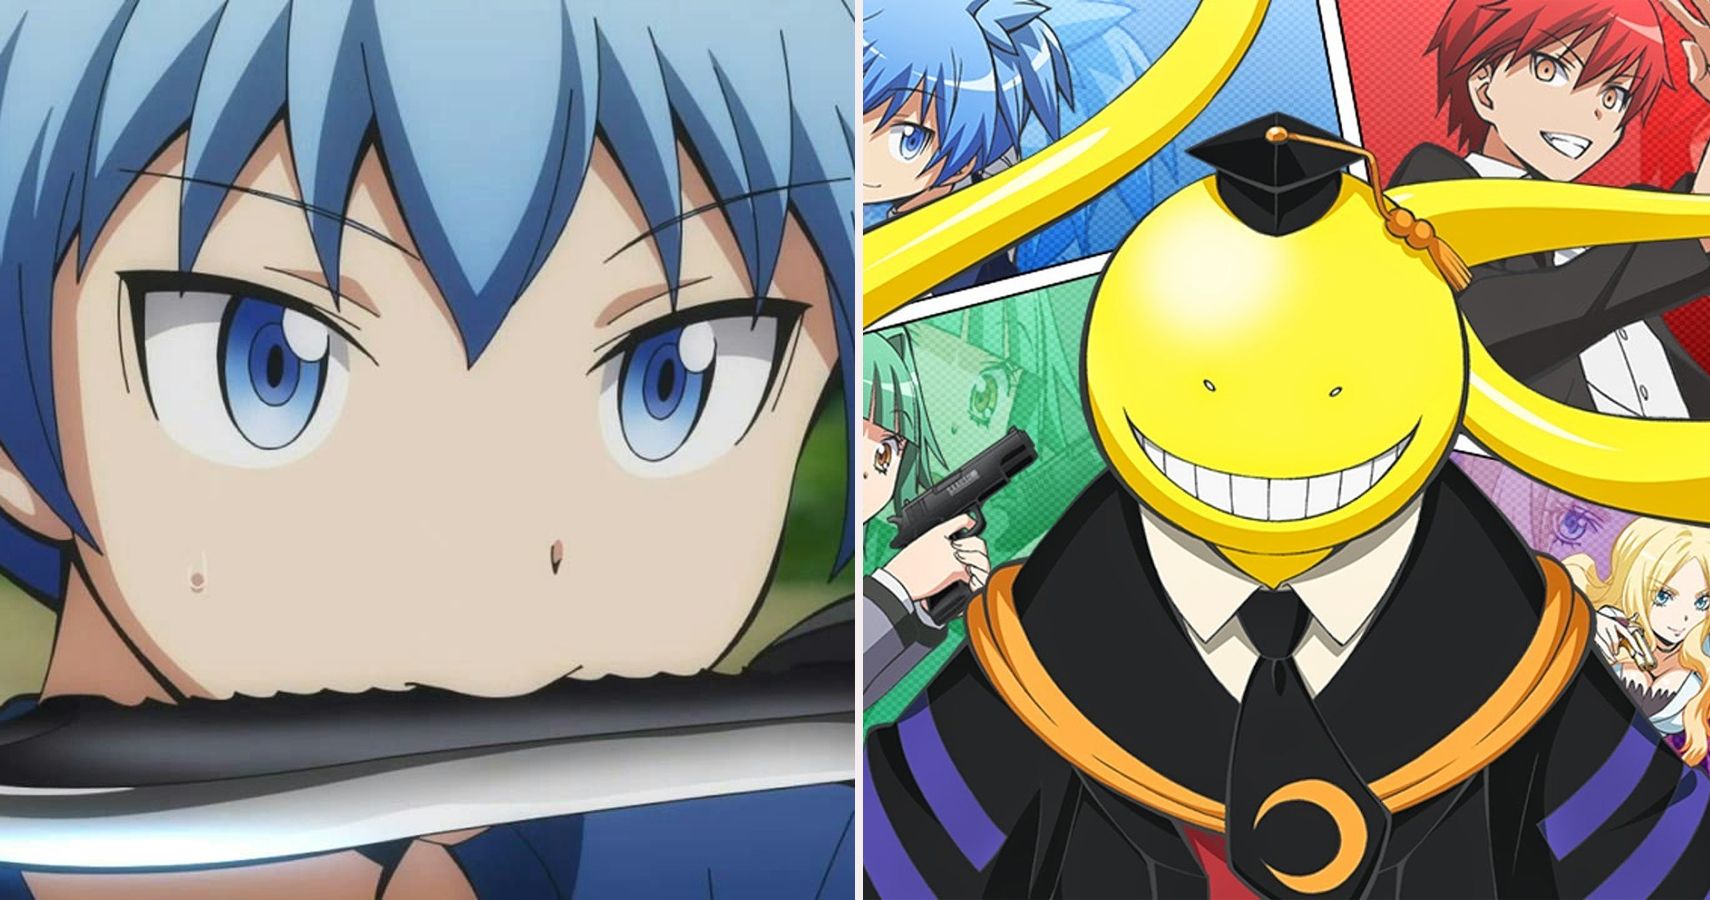 10 Things Anime Fans Should Know About Assassination Classroom